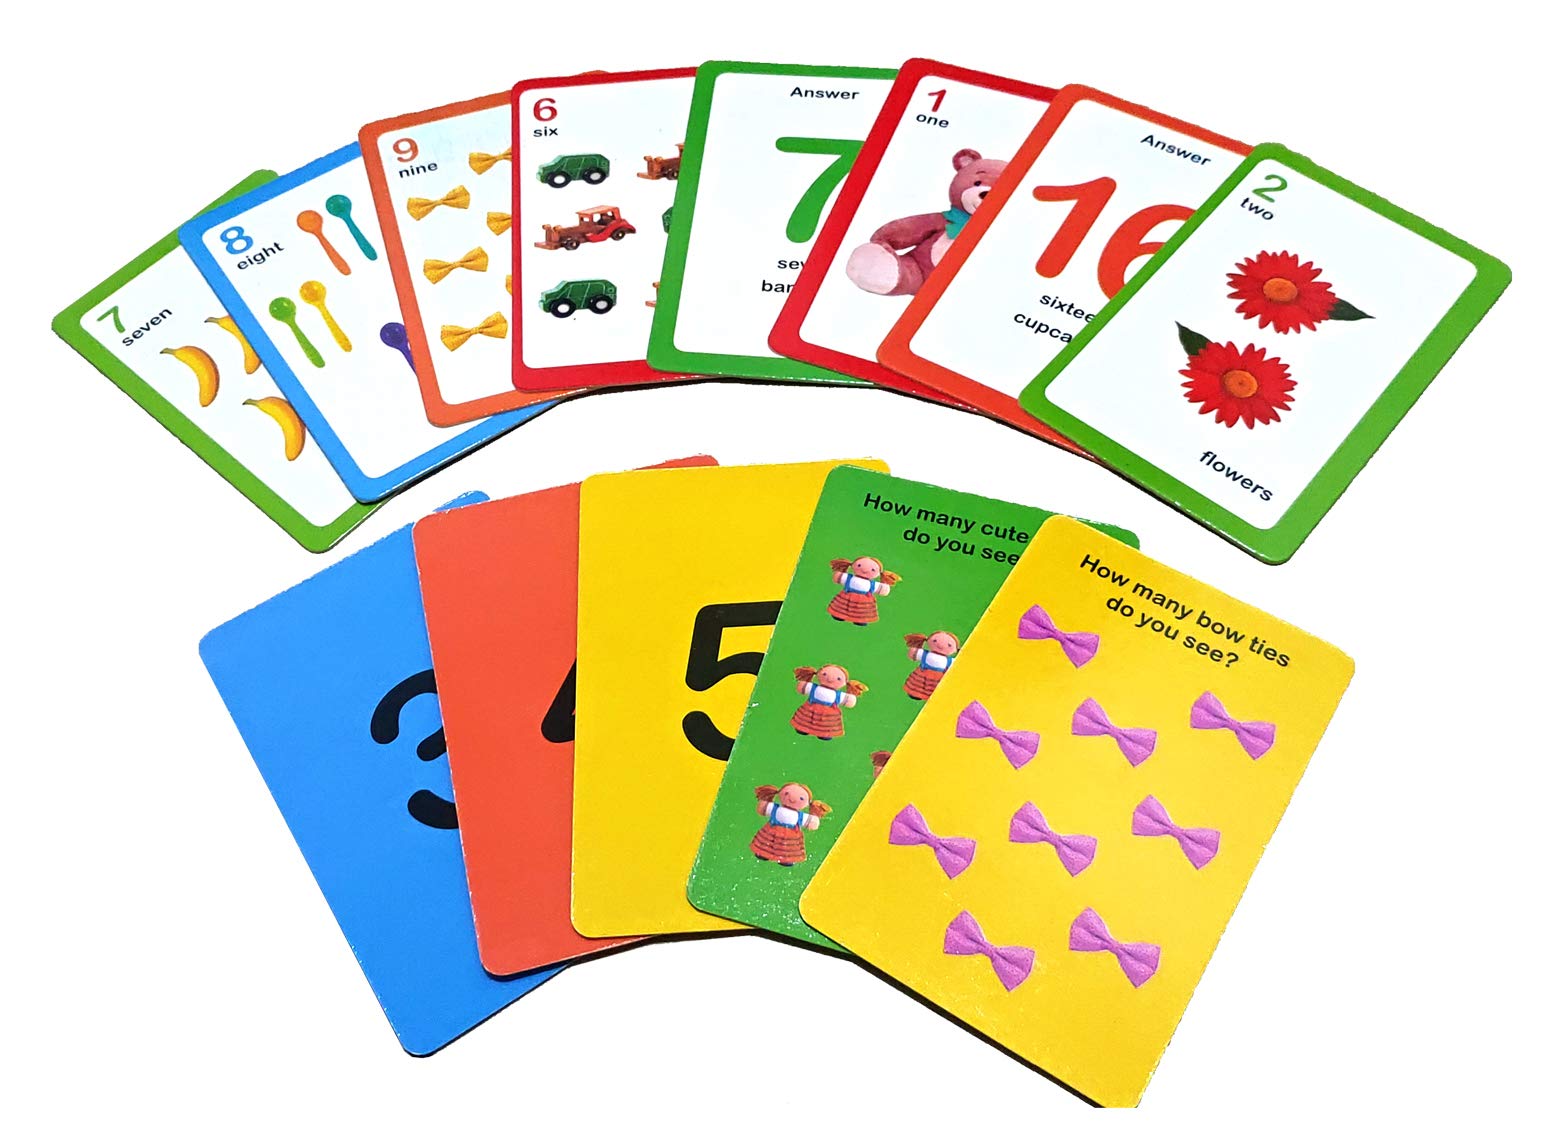 My First Flash Cards Numbers: 30 Early Learning Flash Cards For Kids